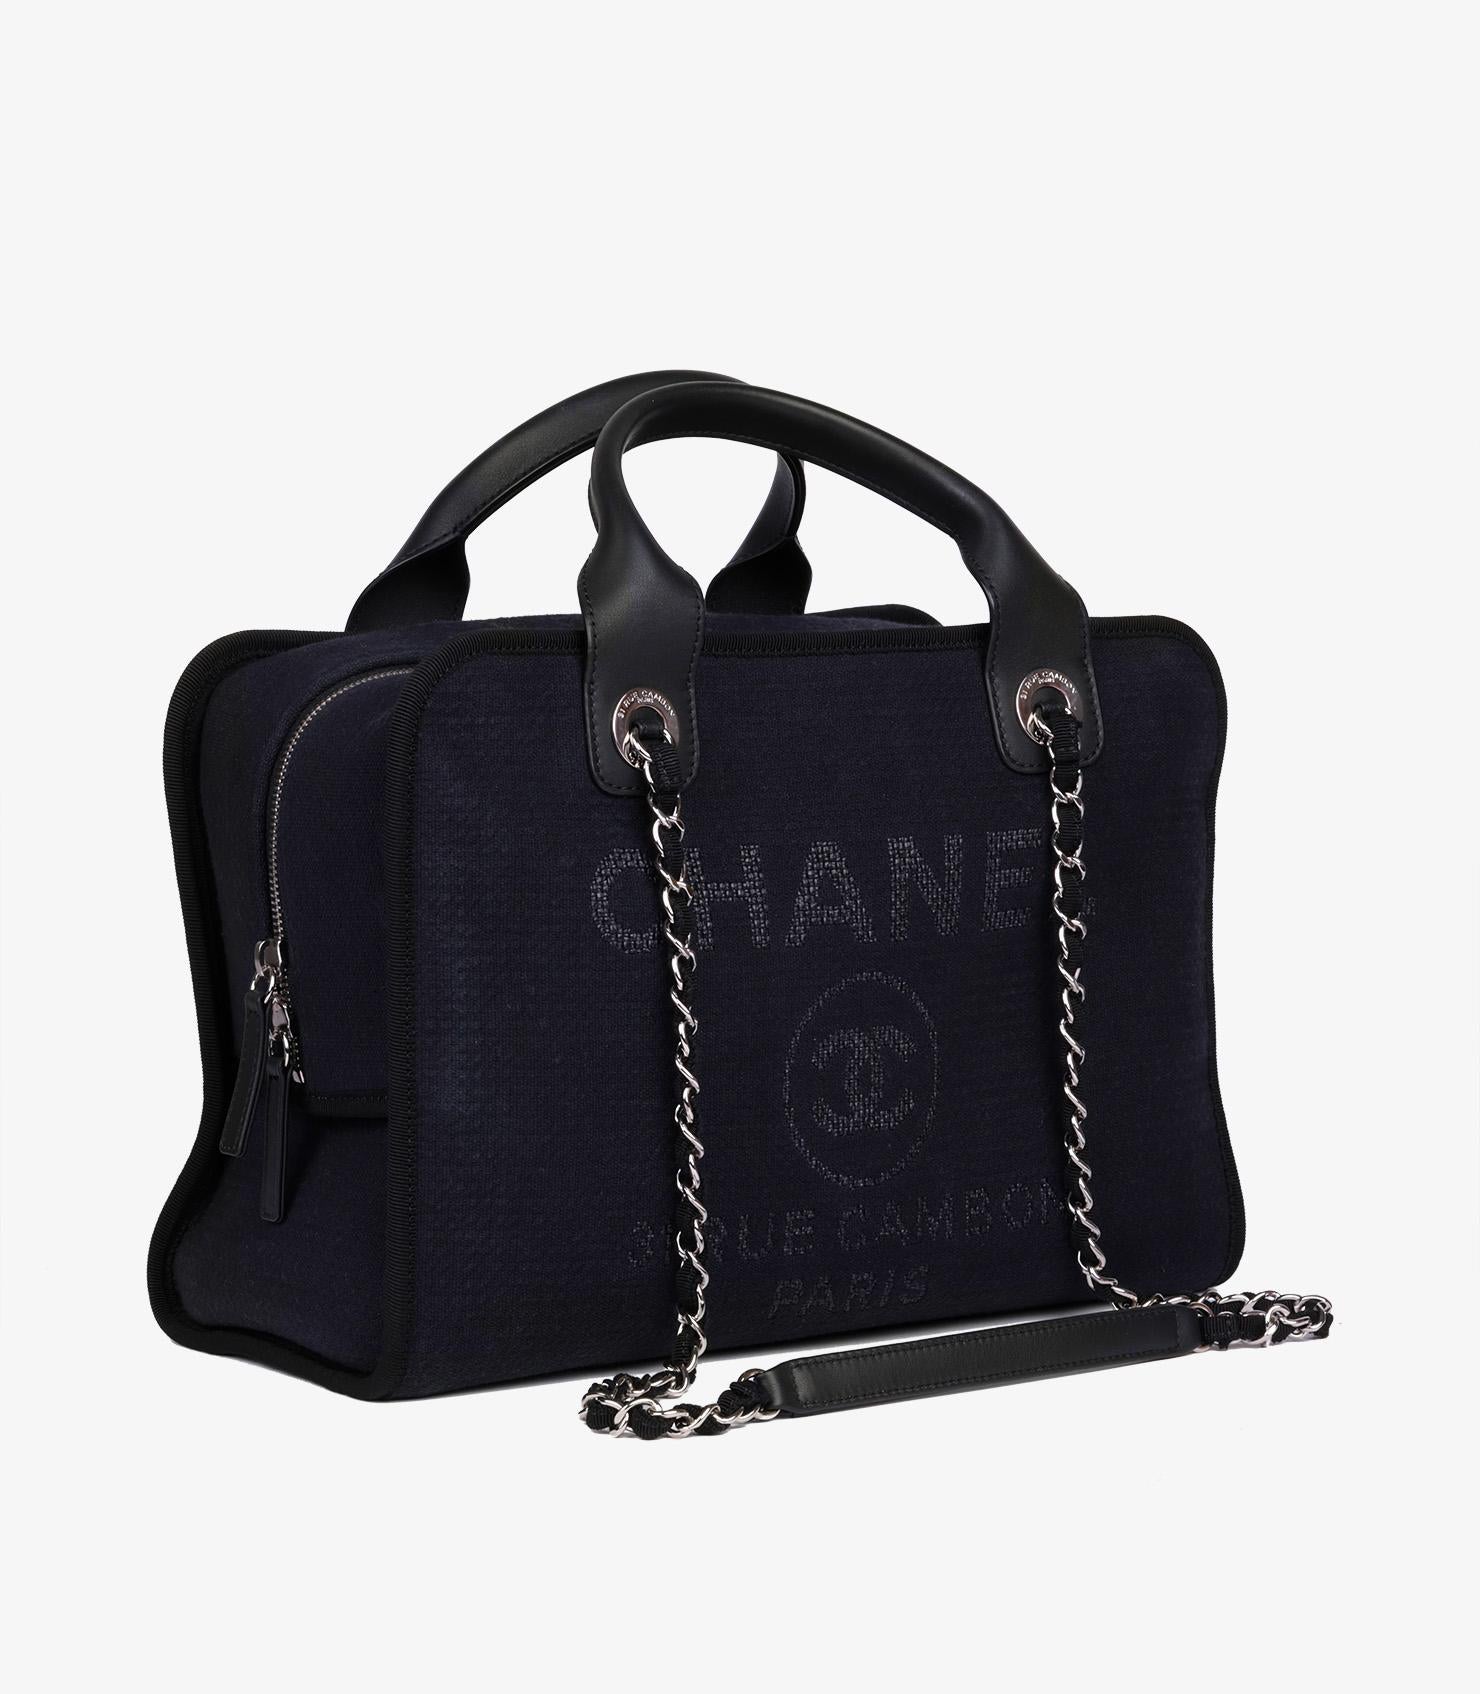 Chanel Navy Canvas & Black Calfskin Leather Deauville Bowling Bag In Excellent Condition For Sale In Bishop's Stortford, Hertfordshire